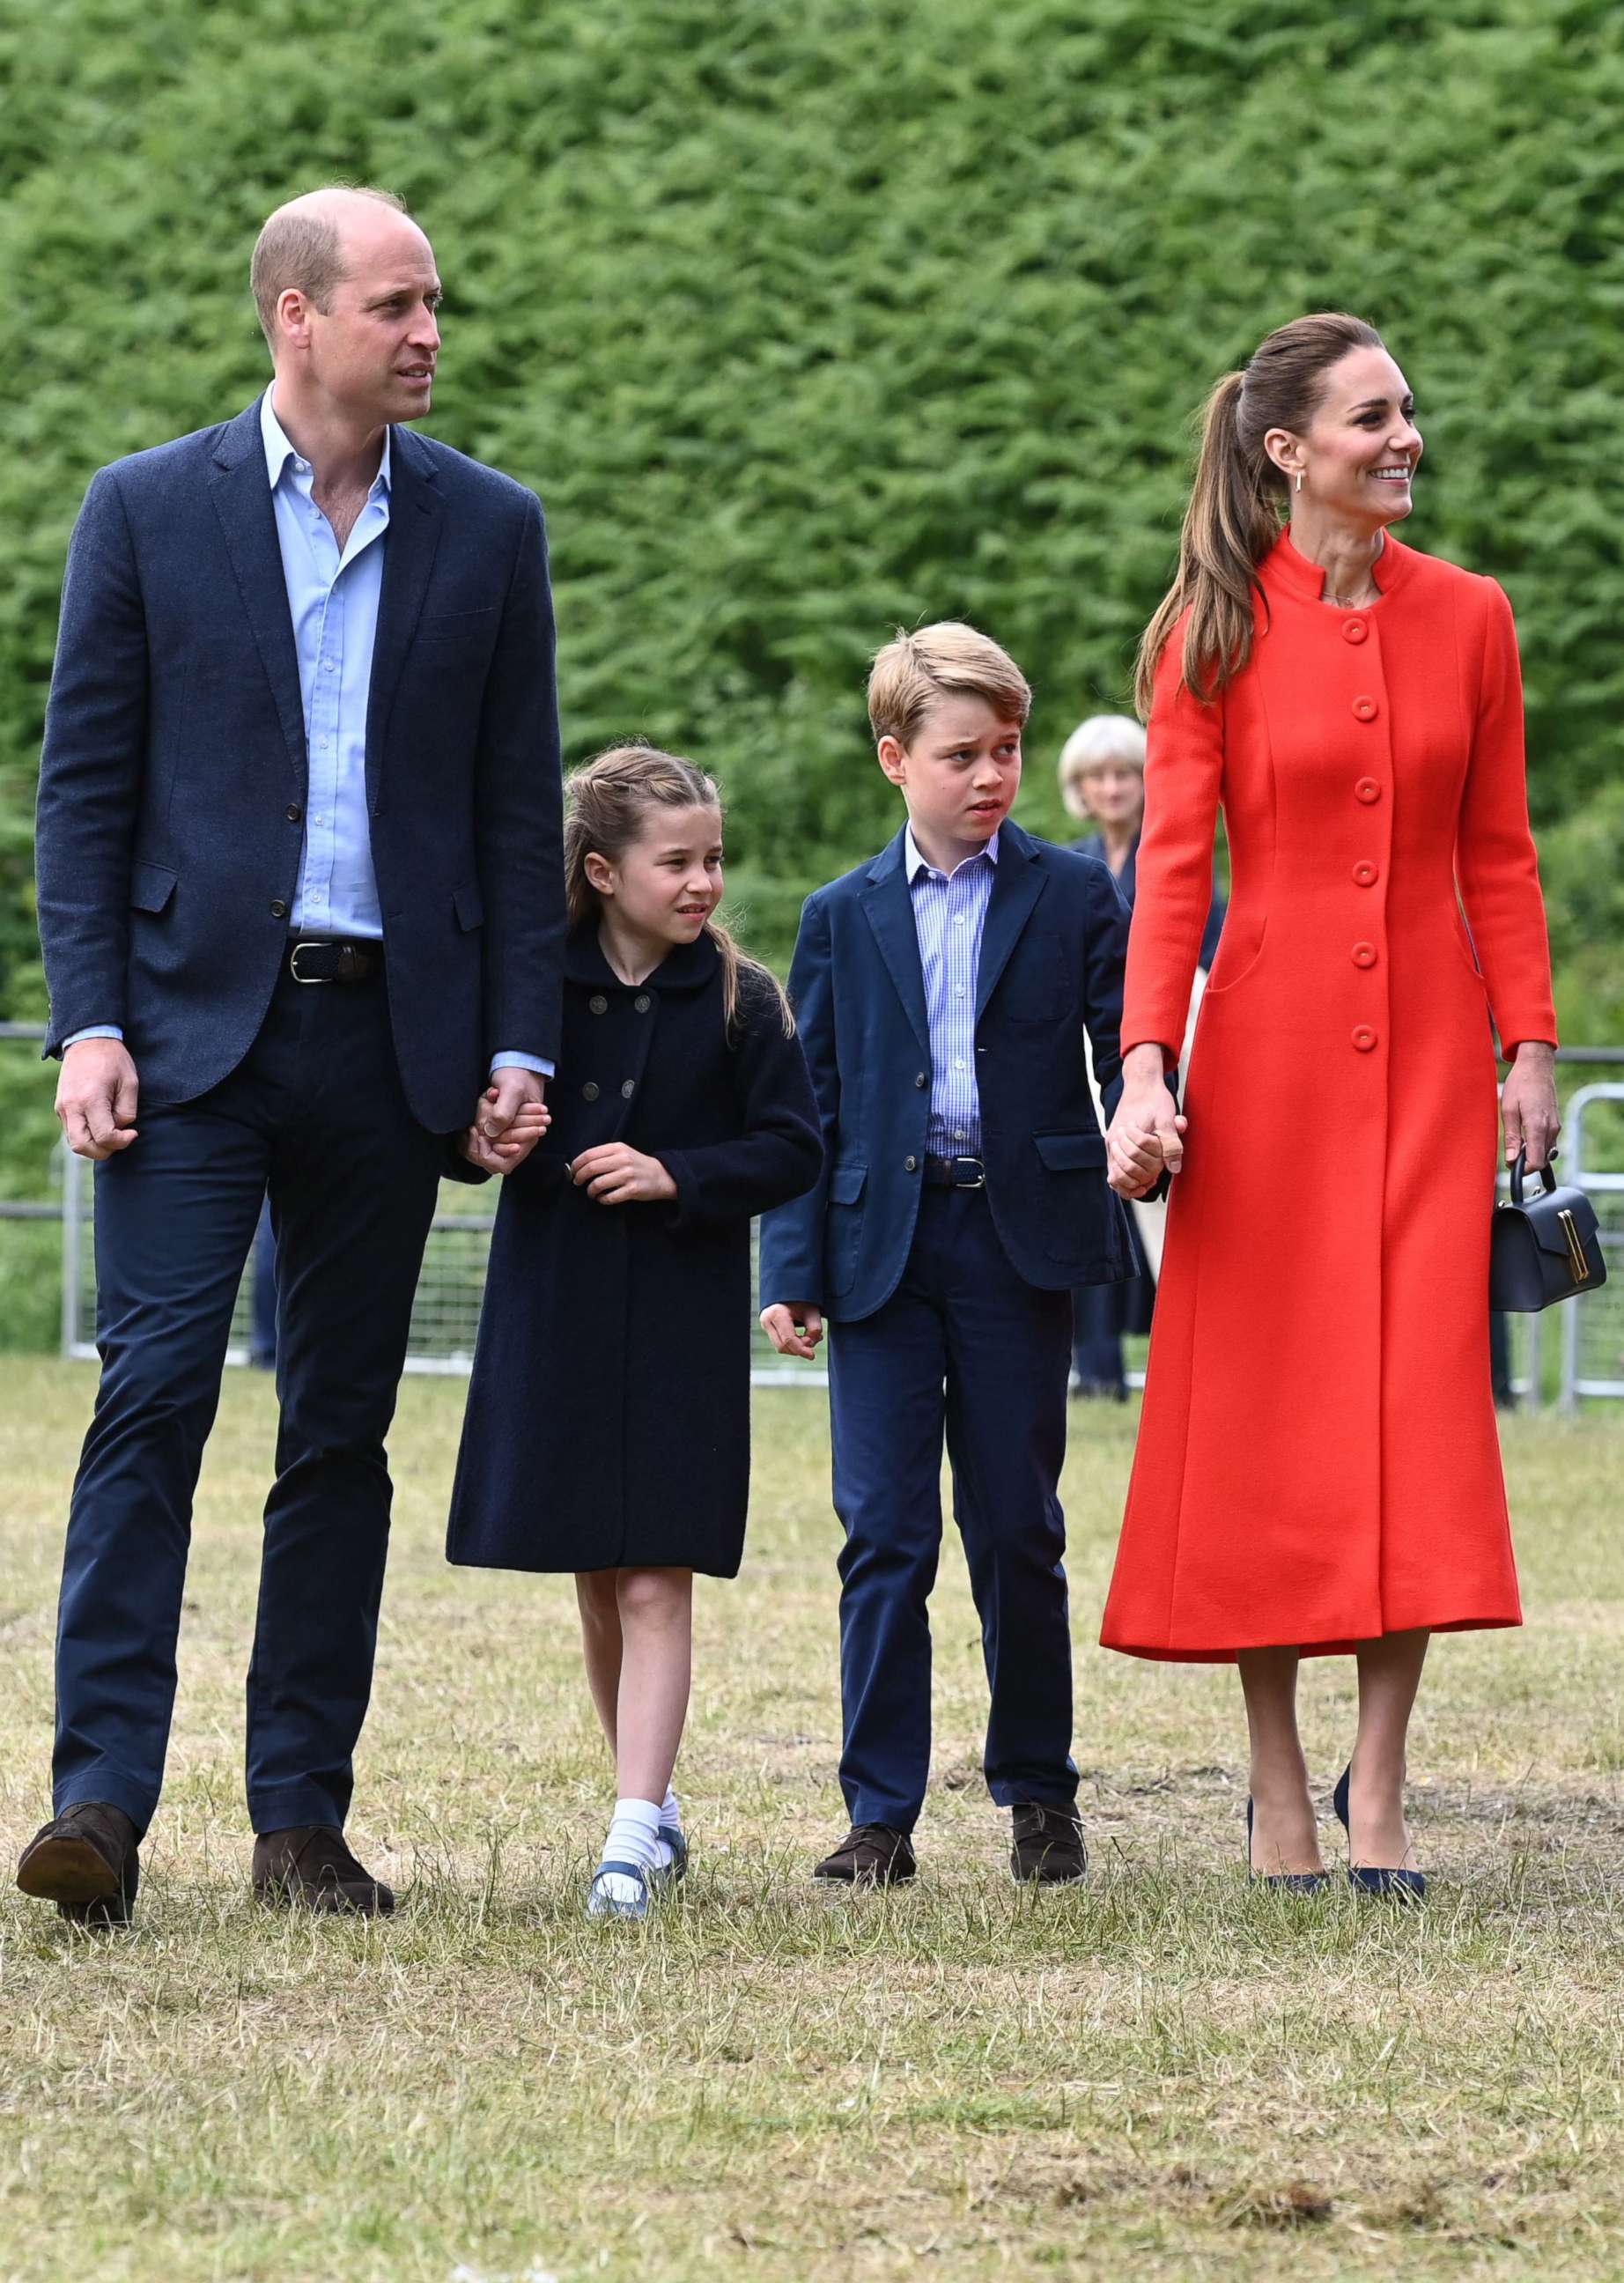 PHOTO: Prince William, Catherine, Duchess of Cambridge, and their children Prince George Princess Charlotte visit Cardiff Castle in Wales, June 4, 2022 as part of the royal family's tour for Queen Elizabeth II's platinum jubilee celebrations.